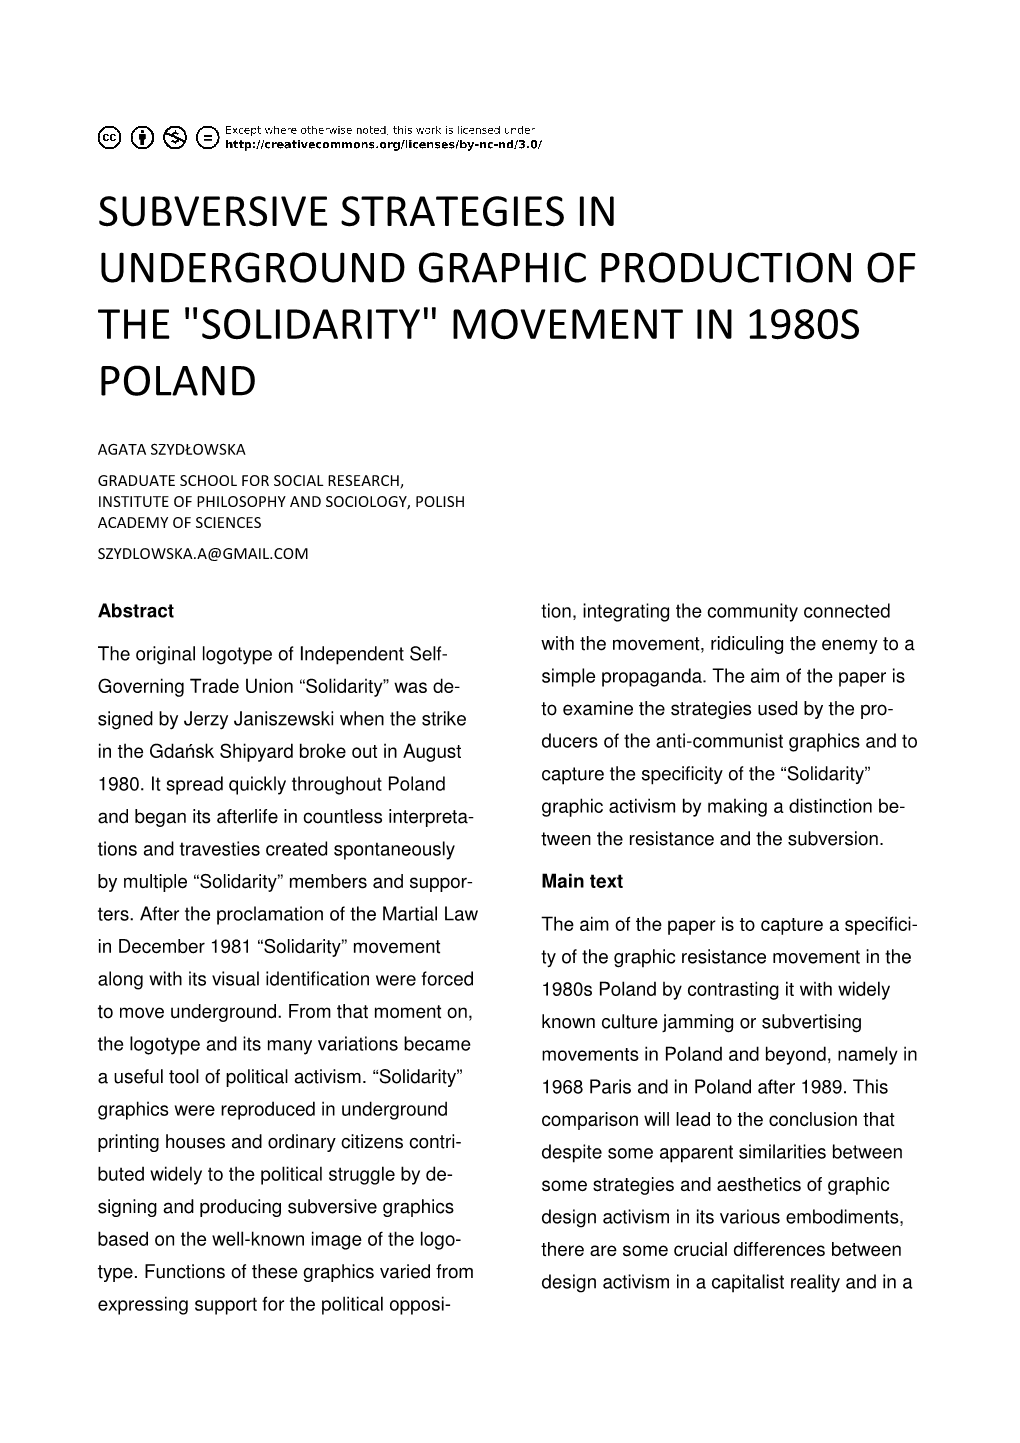 Subversive Strategies in Underground Graphic Production of the "Solidarity" Movement in 1980S Poland